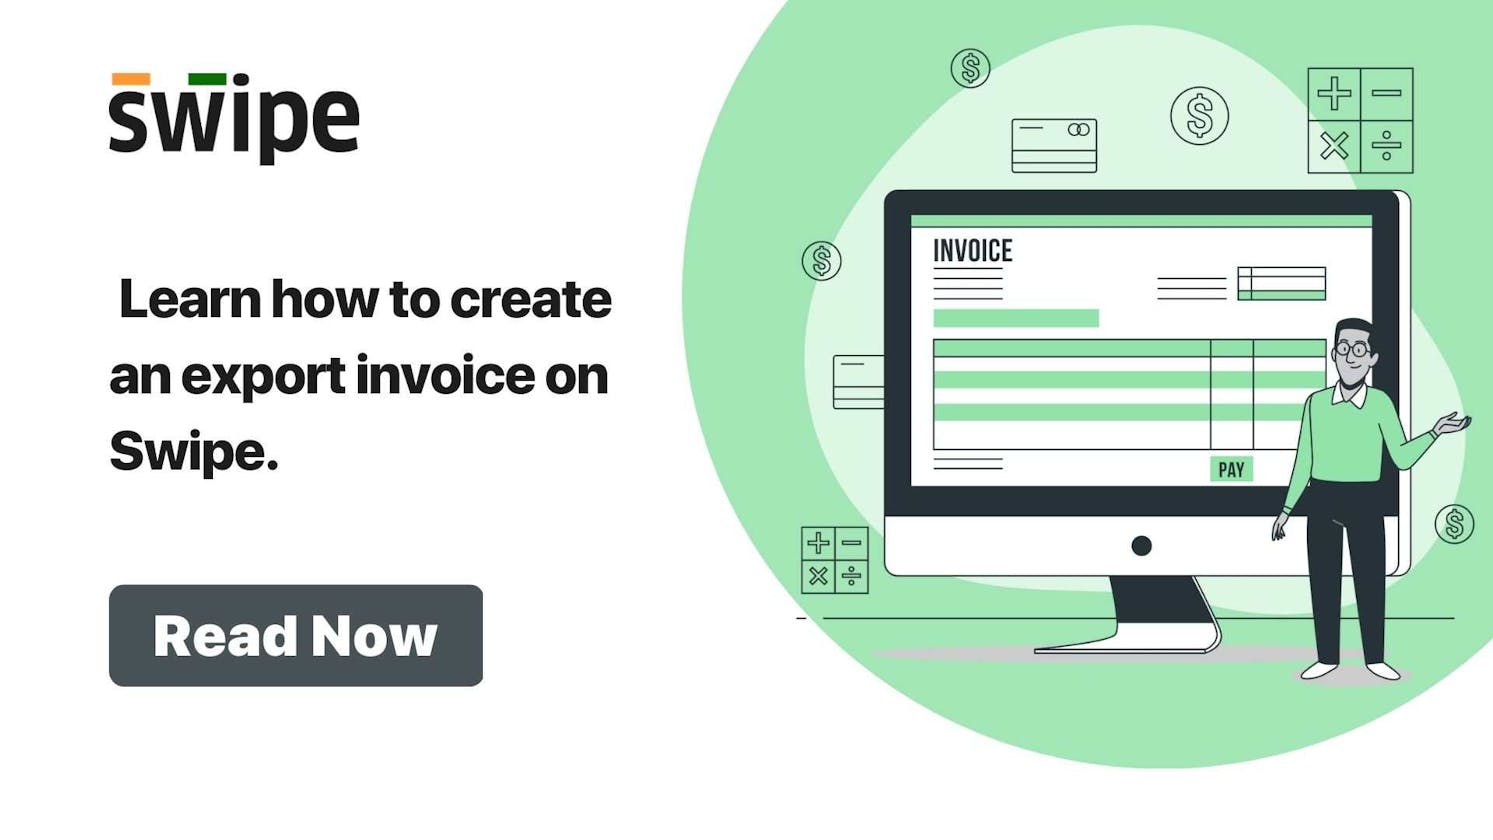 Learn how to create an export invoice on Swipe.